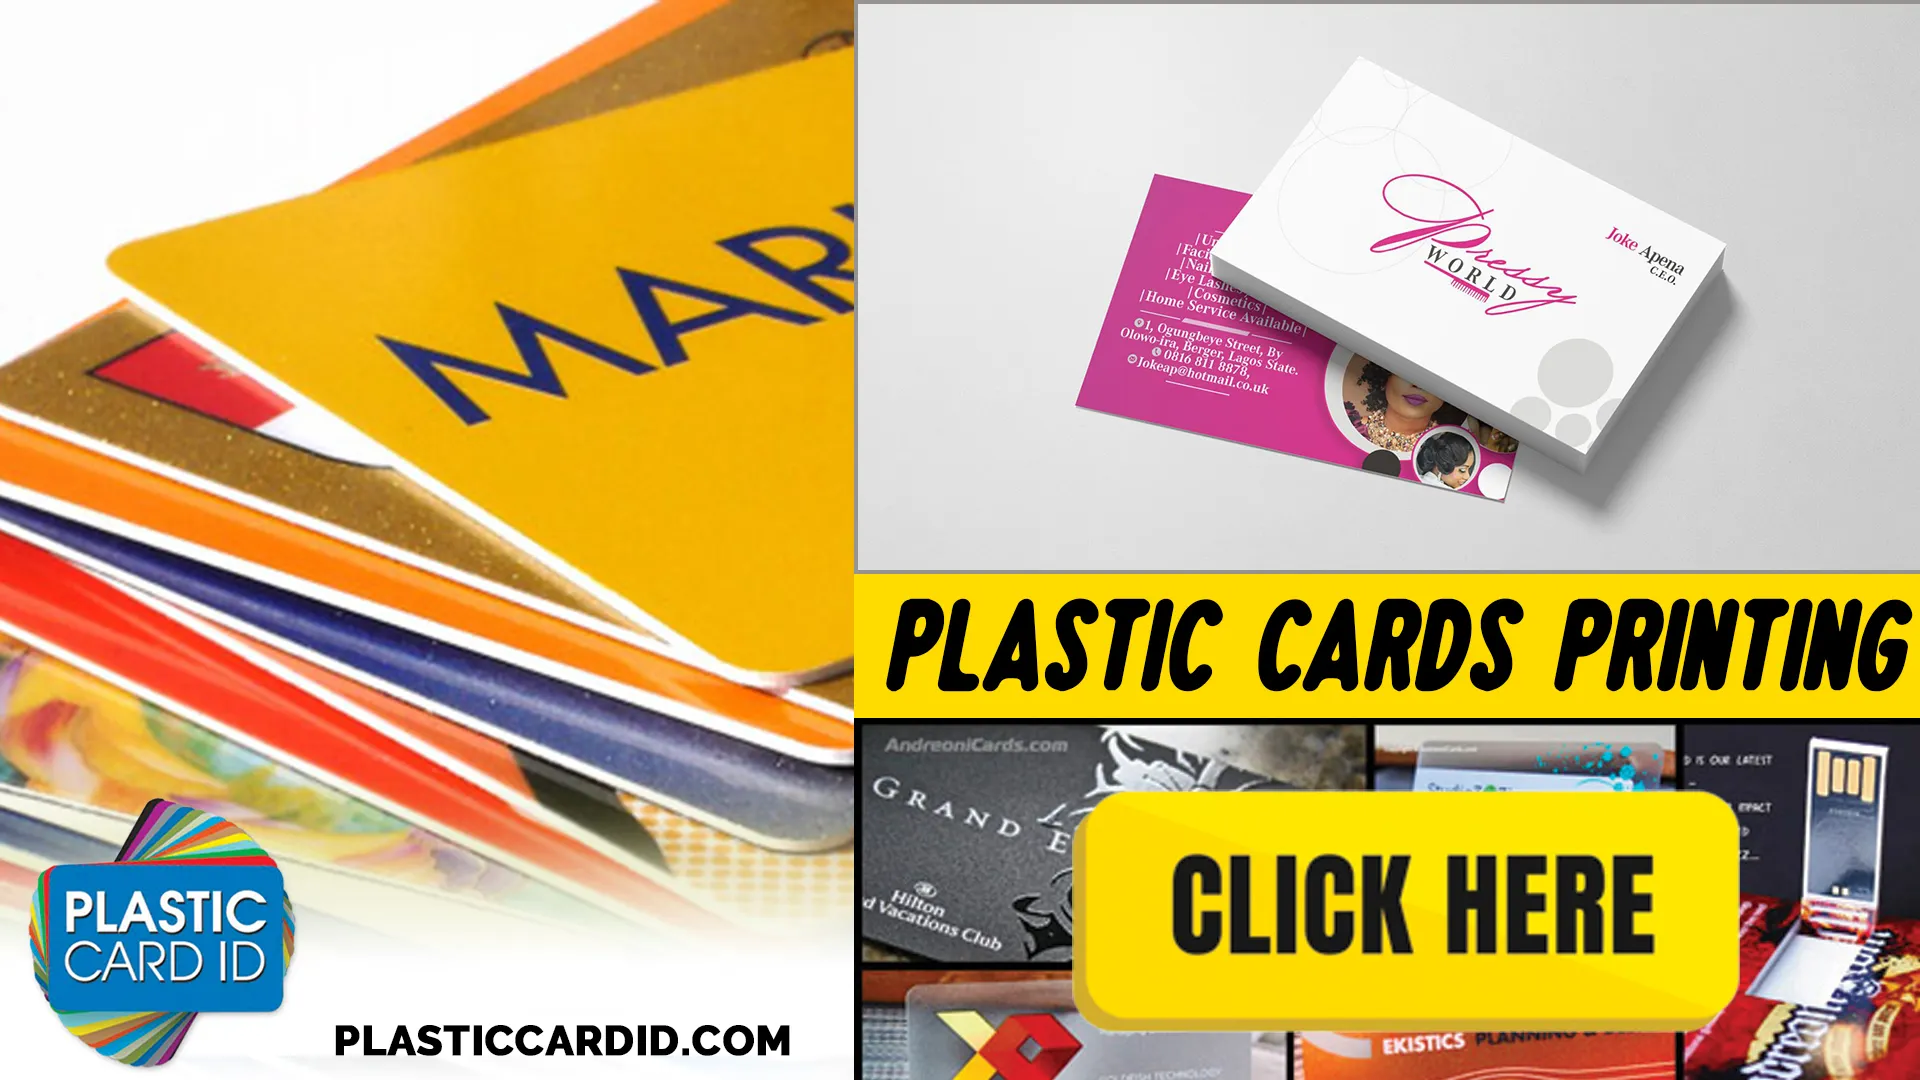 Our Card Range: Meeting Your Needs Across the Board